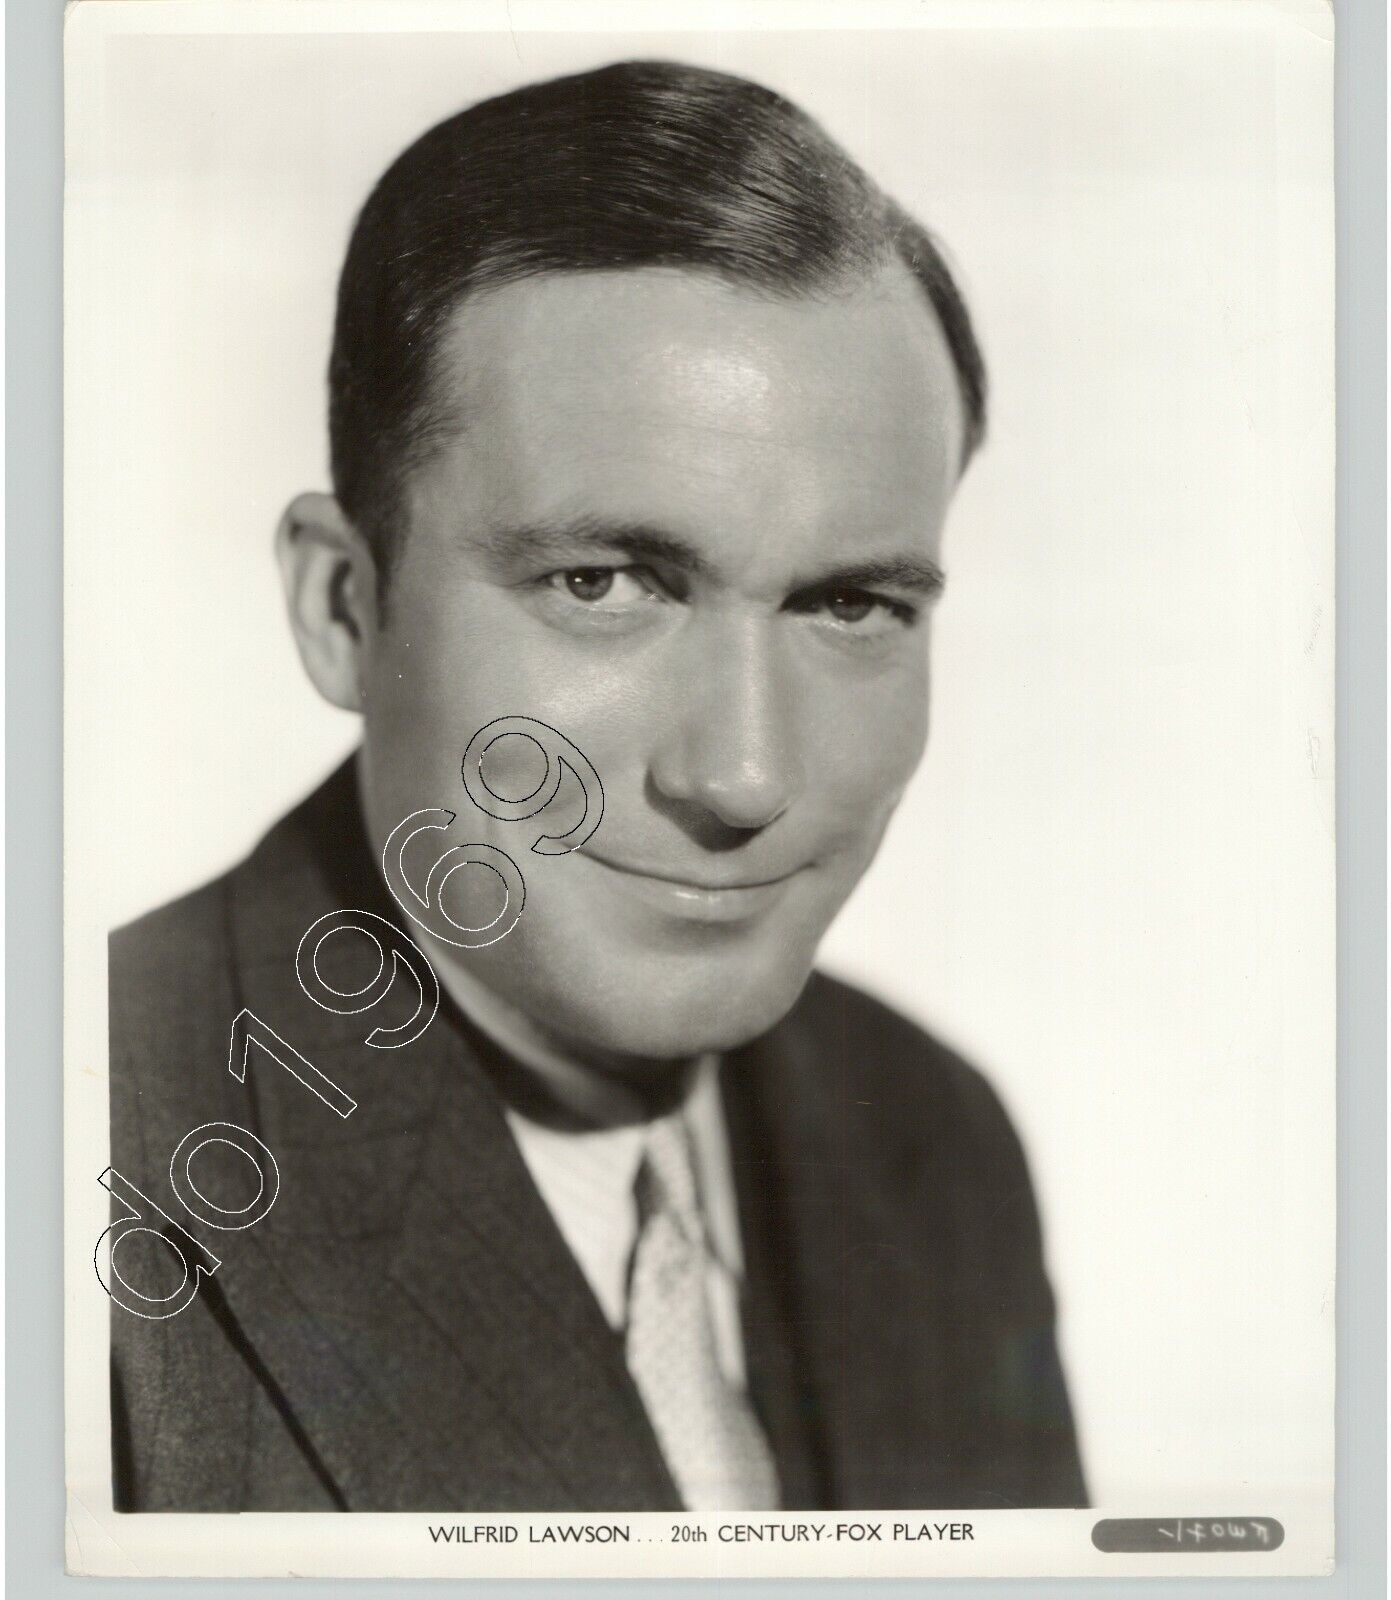 FILM & STAGE Actor WILFRED LAWSON Leading Man MOVIE STAR 1936 Press Photo